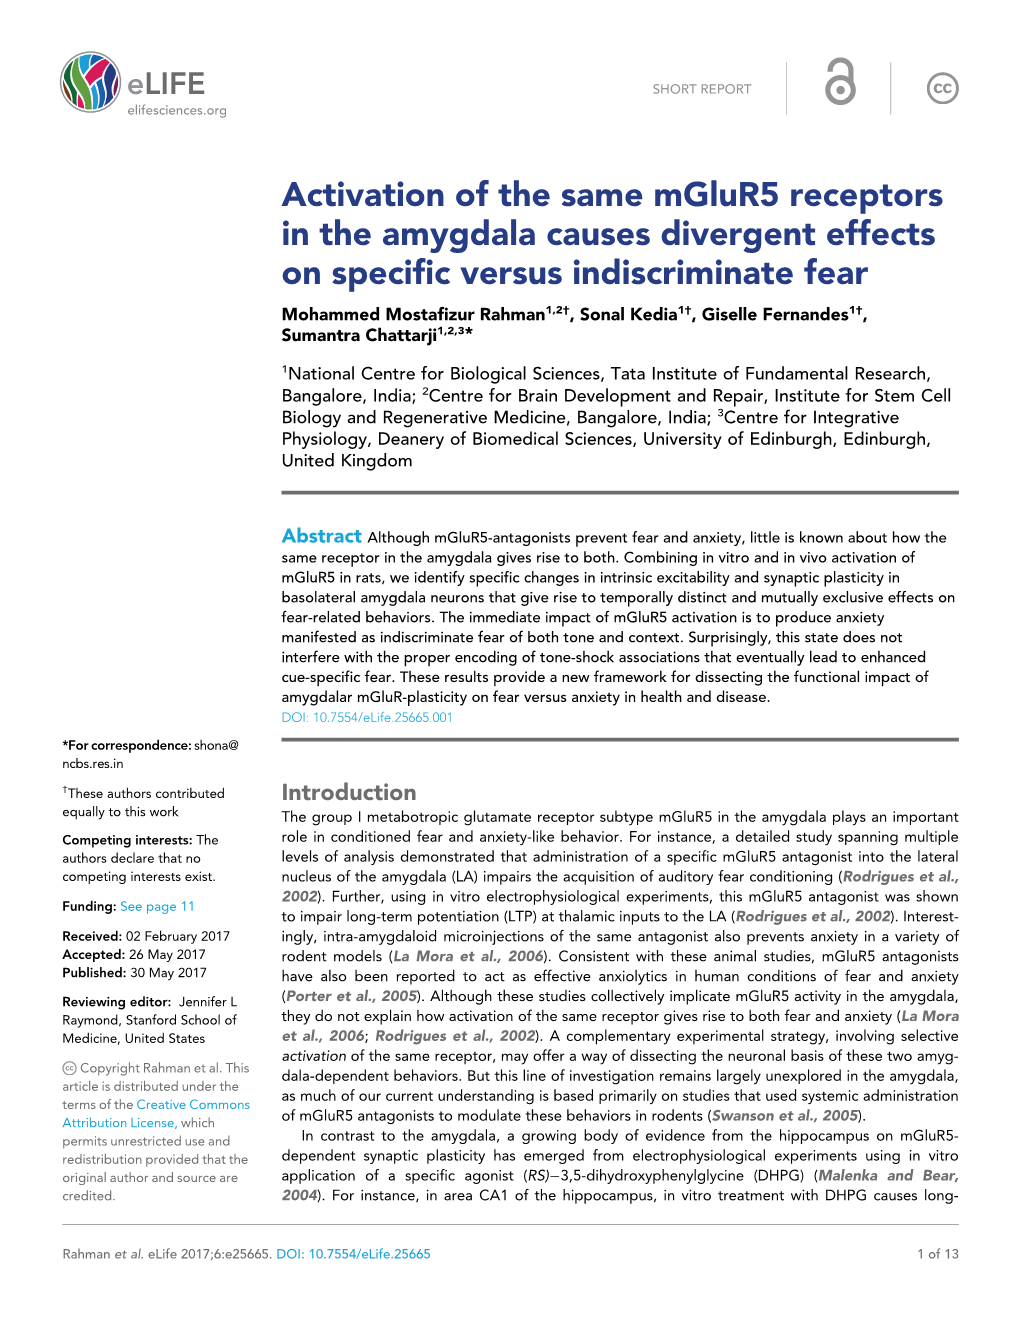 Activation of the Same Mglur5 Receptors in the Amygdala Causes